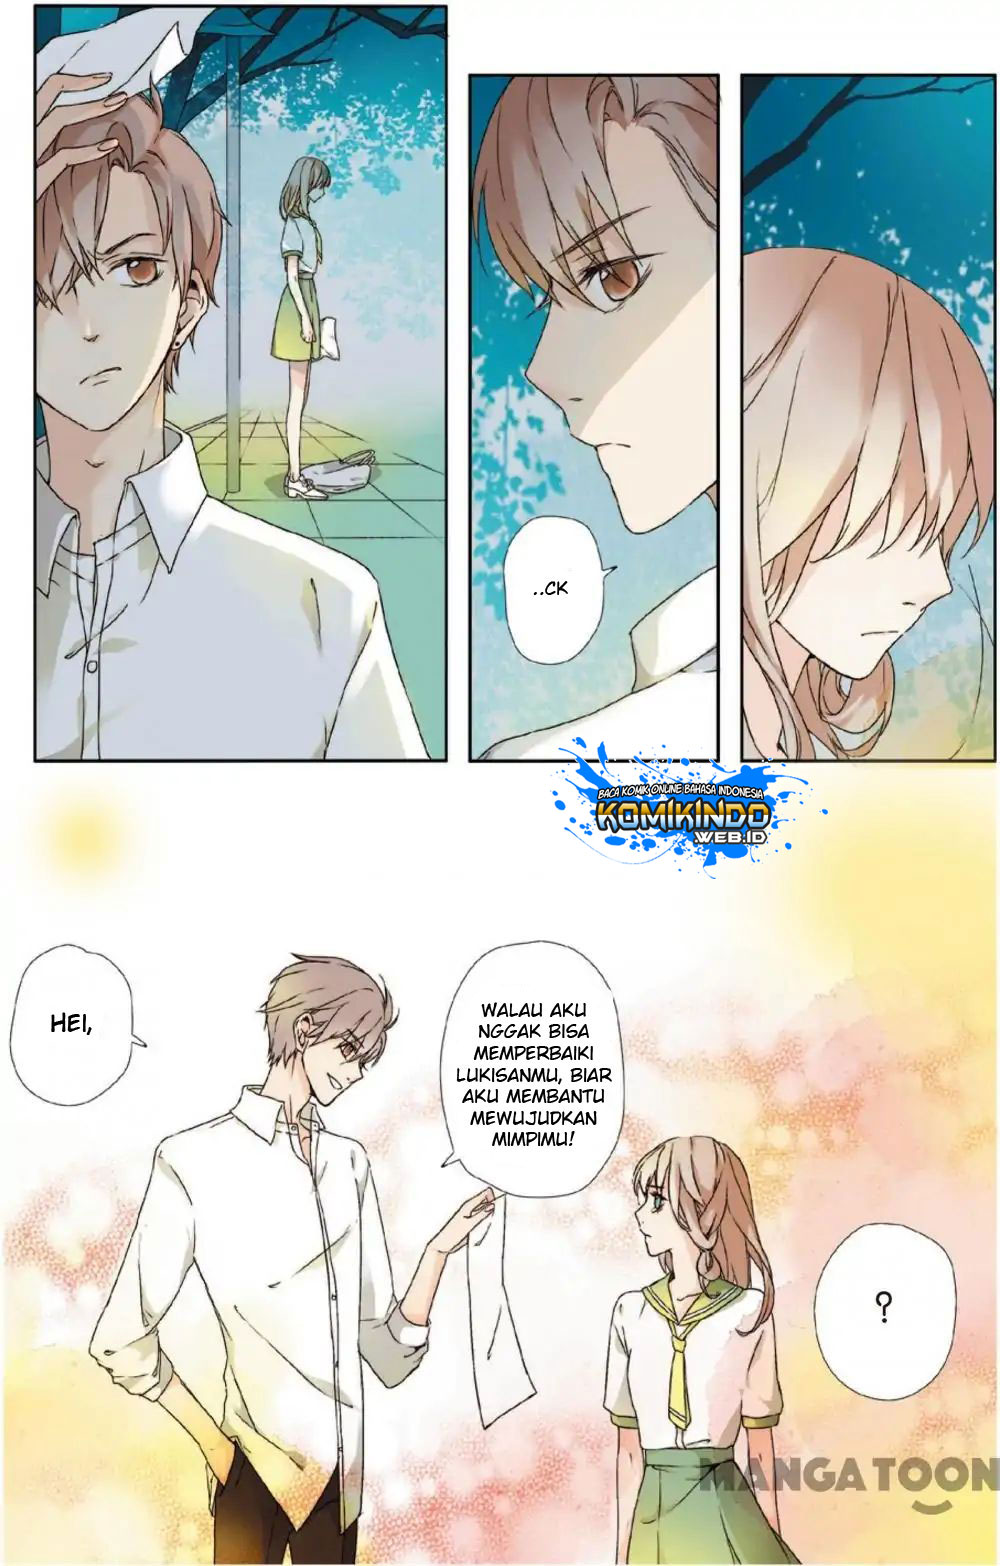 Love is a Cherry Color Chapter 02